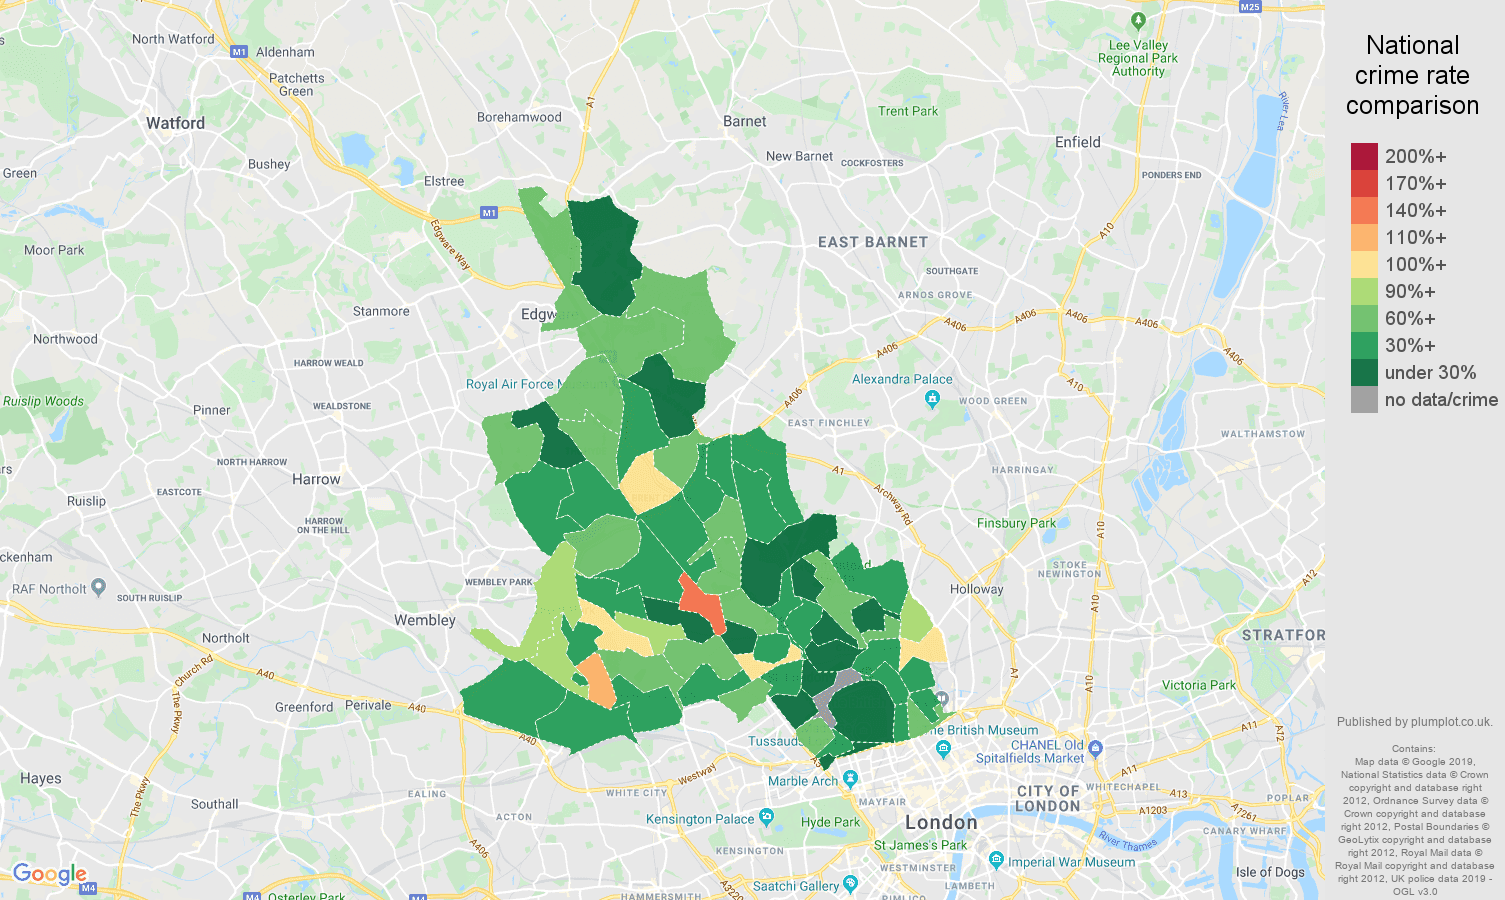 North West London other crime rate comparison map